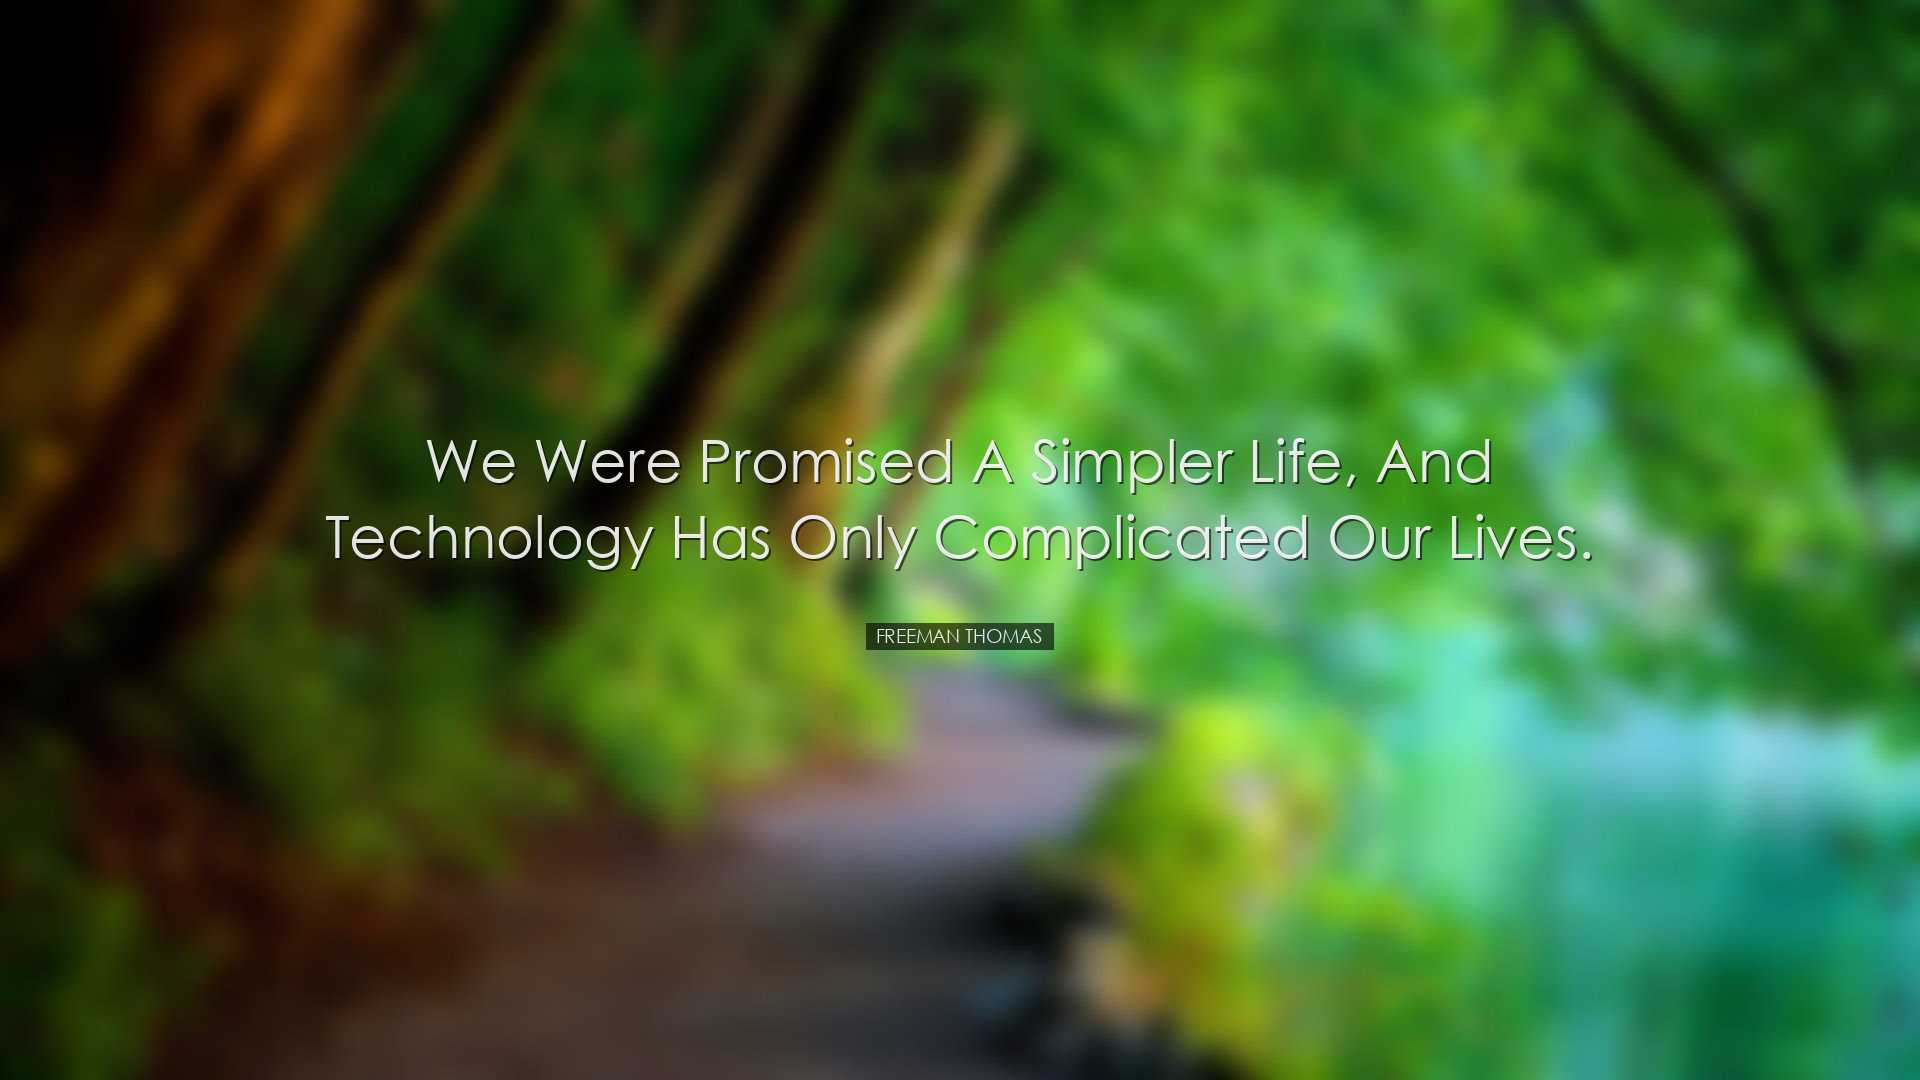 We were promised a simpler life, and technology has only complicat